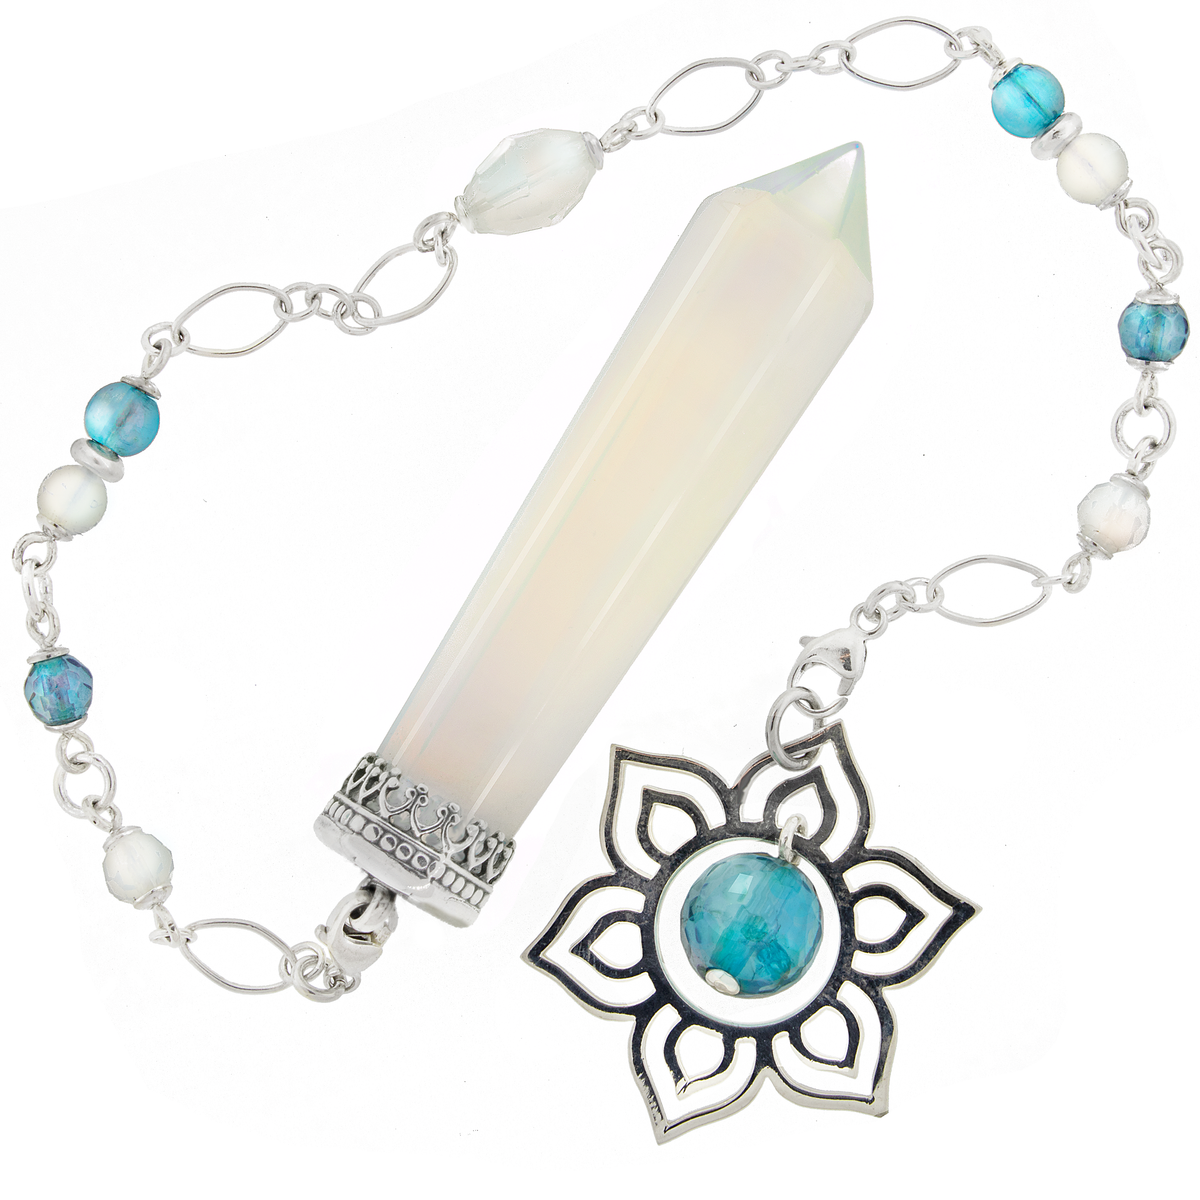 One of a Kind #375 - Opalite, Aqua Aura and Sterling Silver Pendulum by Ask Your Pendulum